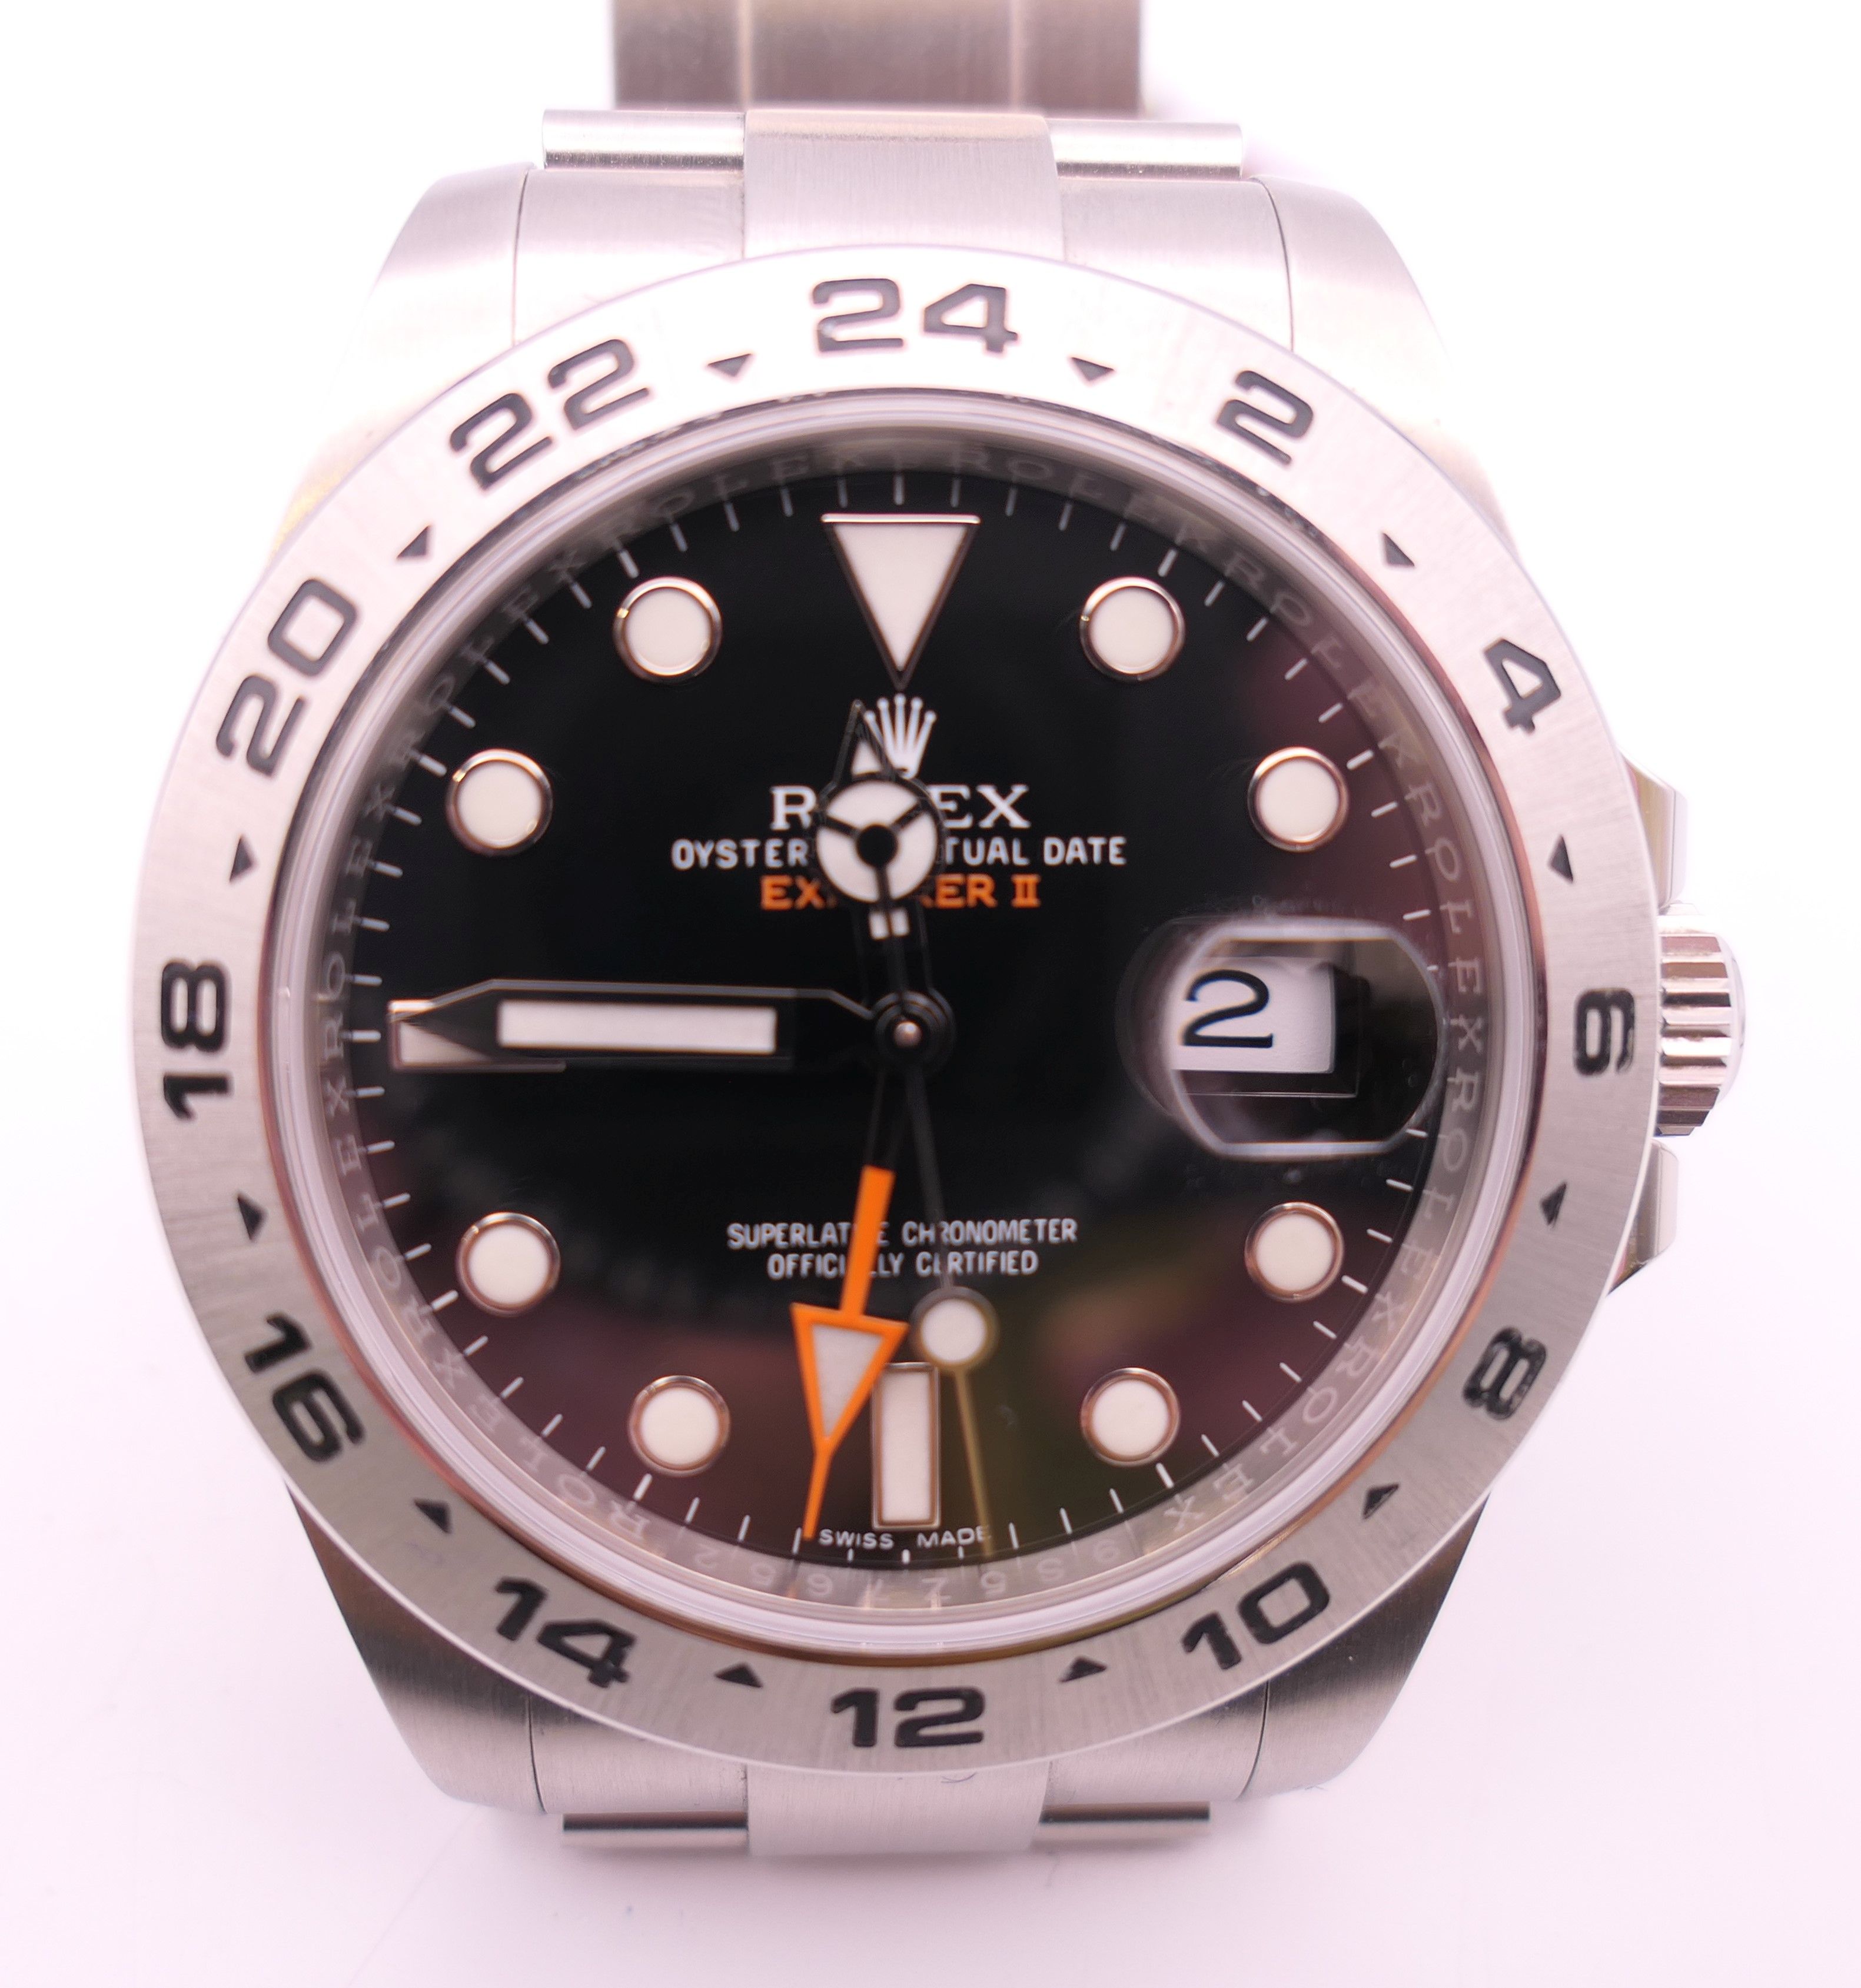 A Rolex Perpetual Date Explorer II watch with black dial, model number 216570,